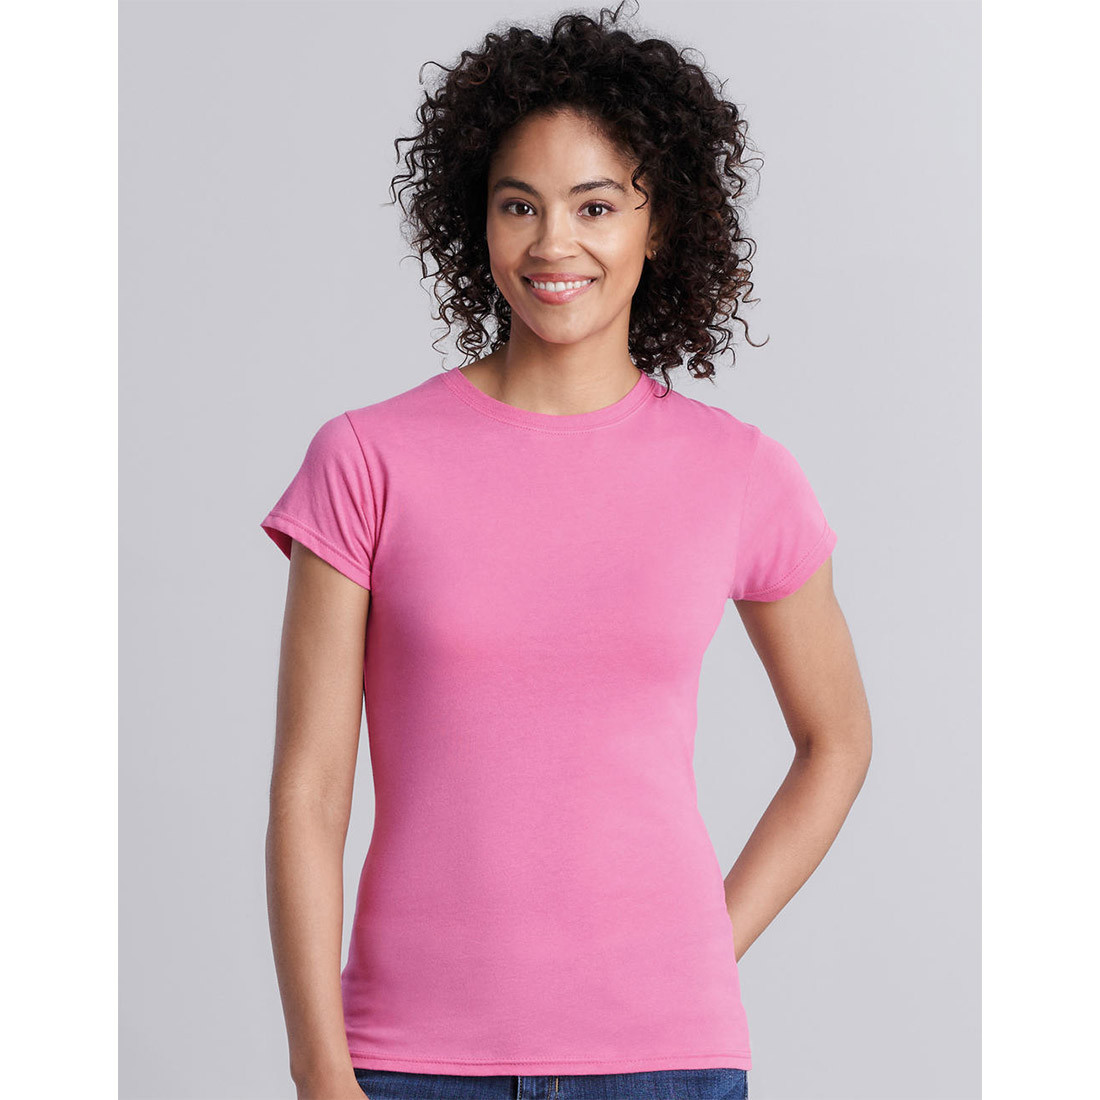 Tricou Dama Softstyle® Fitted - Imbracaminte de protectie